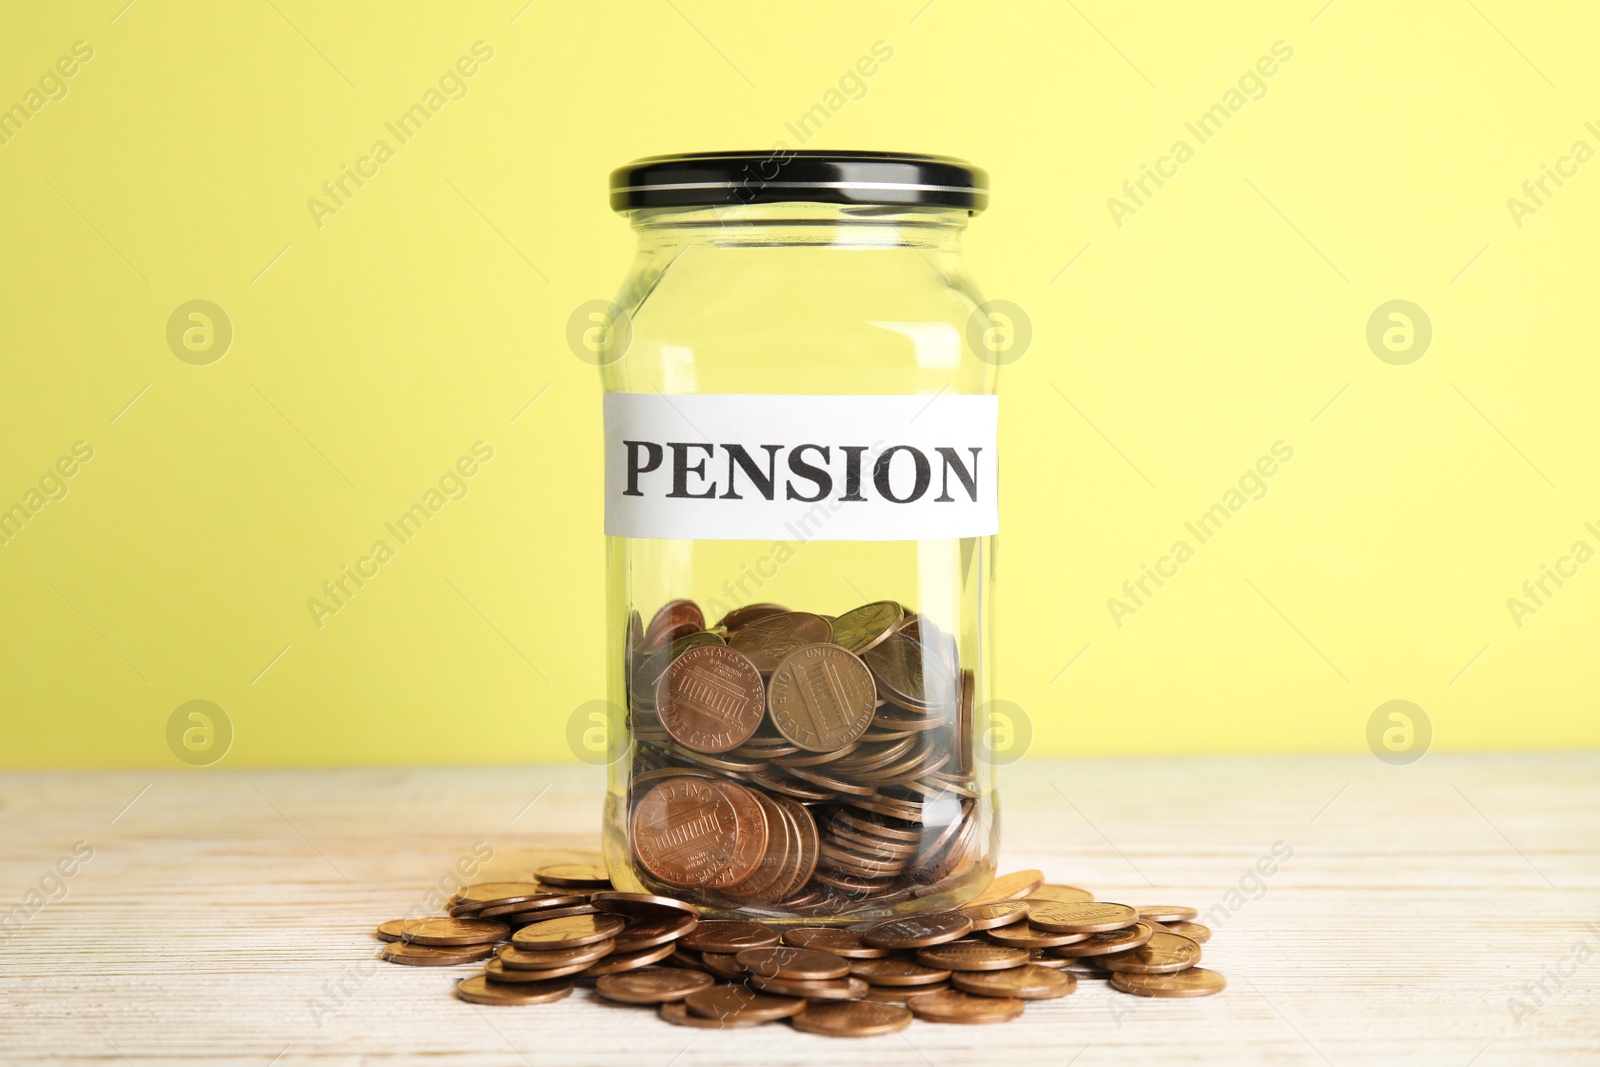 Photo of Glass jar with label PENSION and coins on table against yellow background